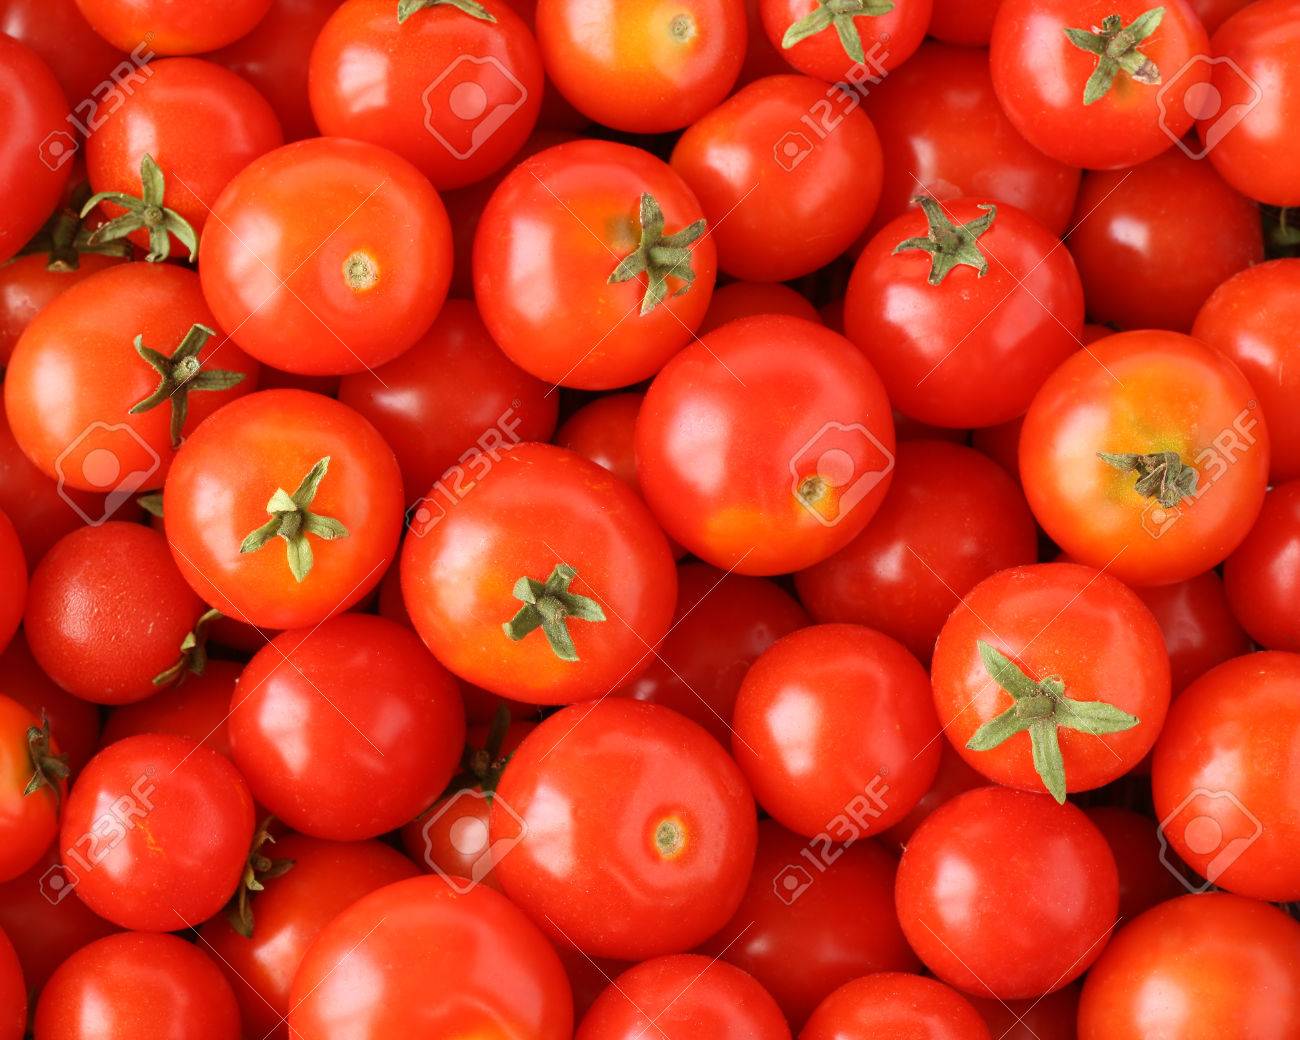 Organically Grown Red Cherry Tomatoes Background Stock Photo